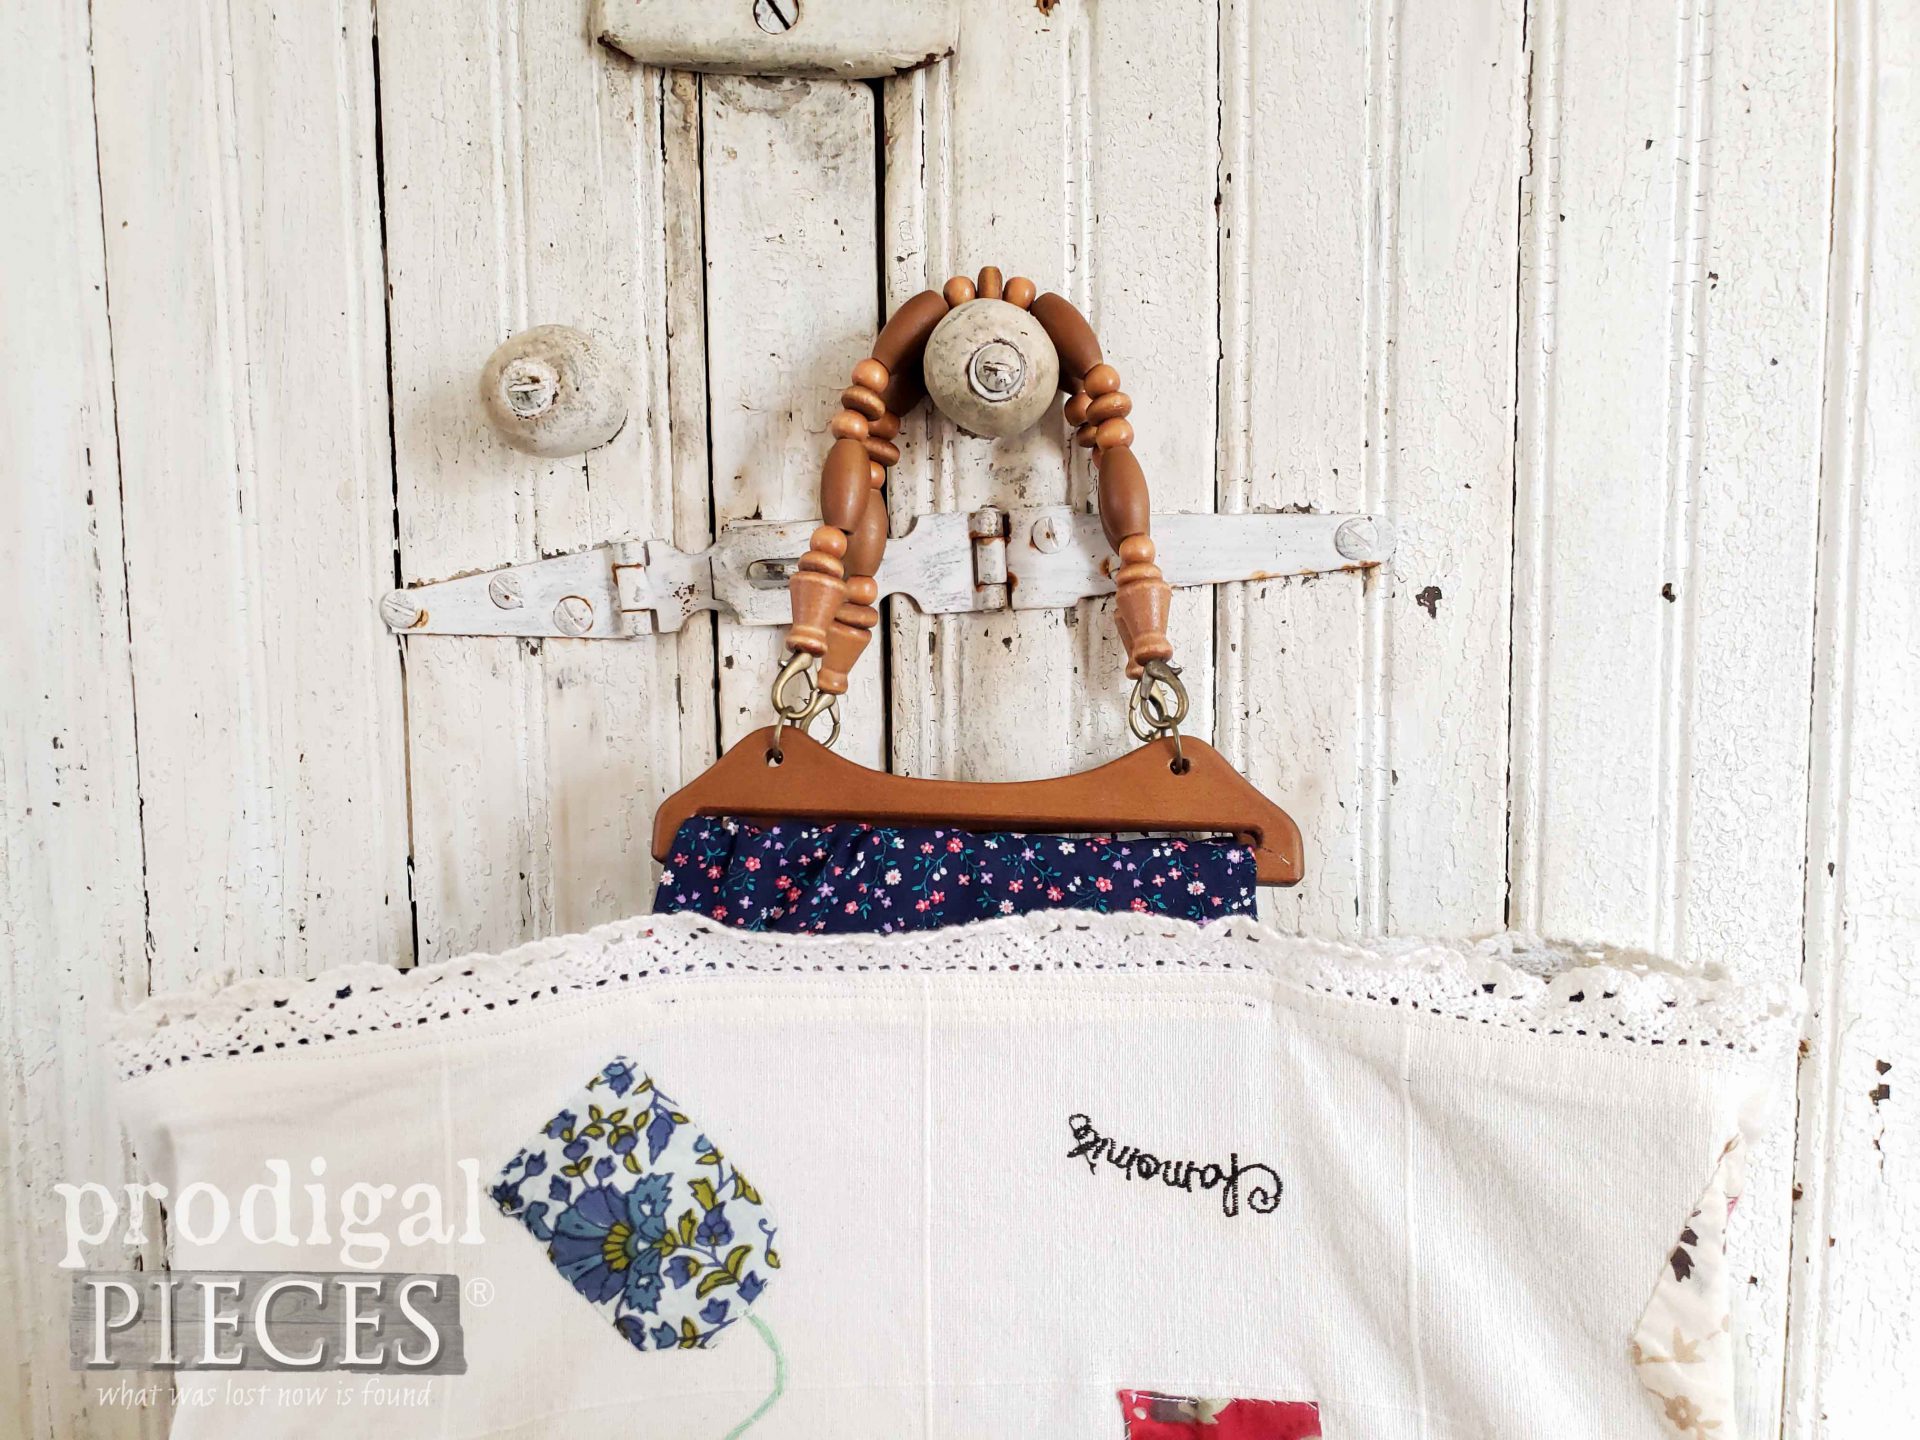 Vintage Wooden Bead Purse Handles on Tote by Larissa of Prodigal Pieces | prodigalpieces.com #prodigalpieces #handmade #vintage #bag #fashion